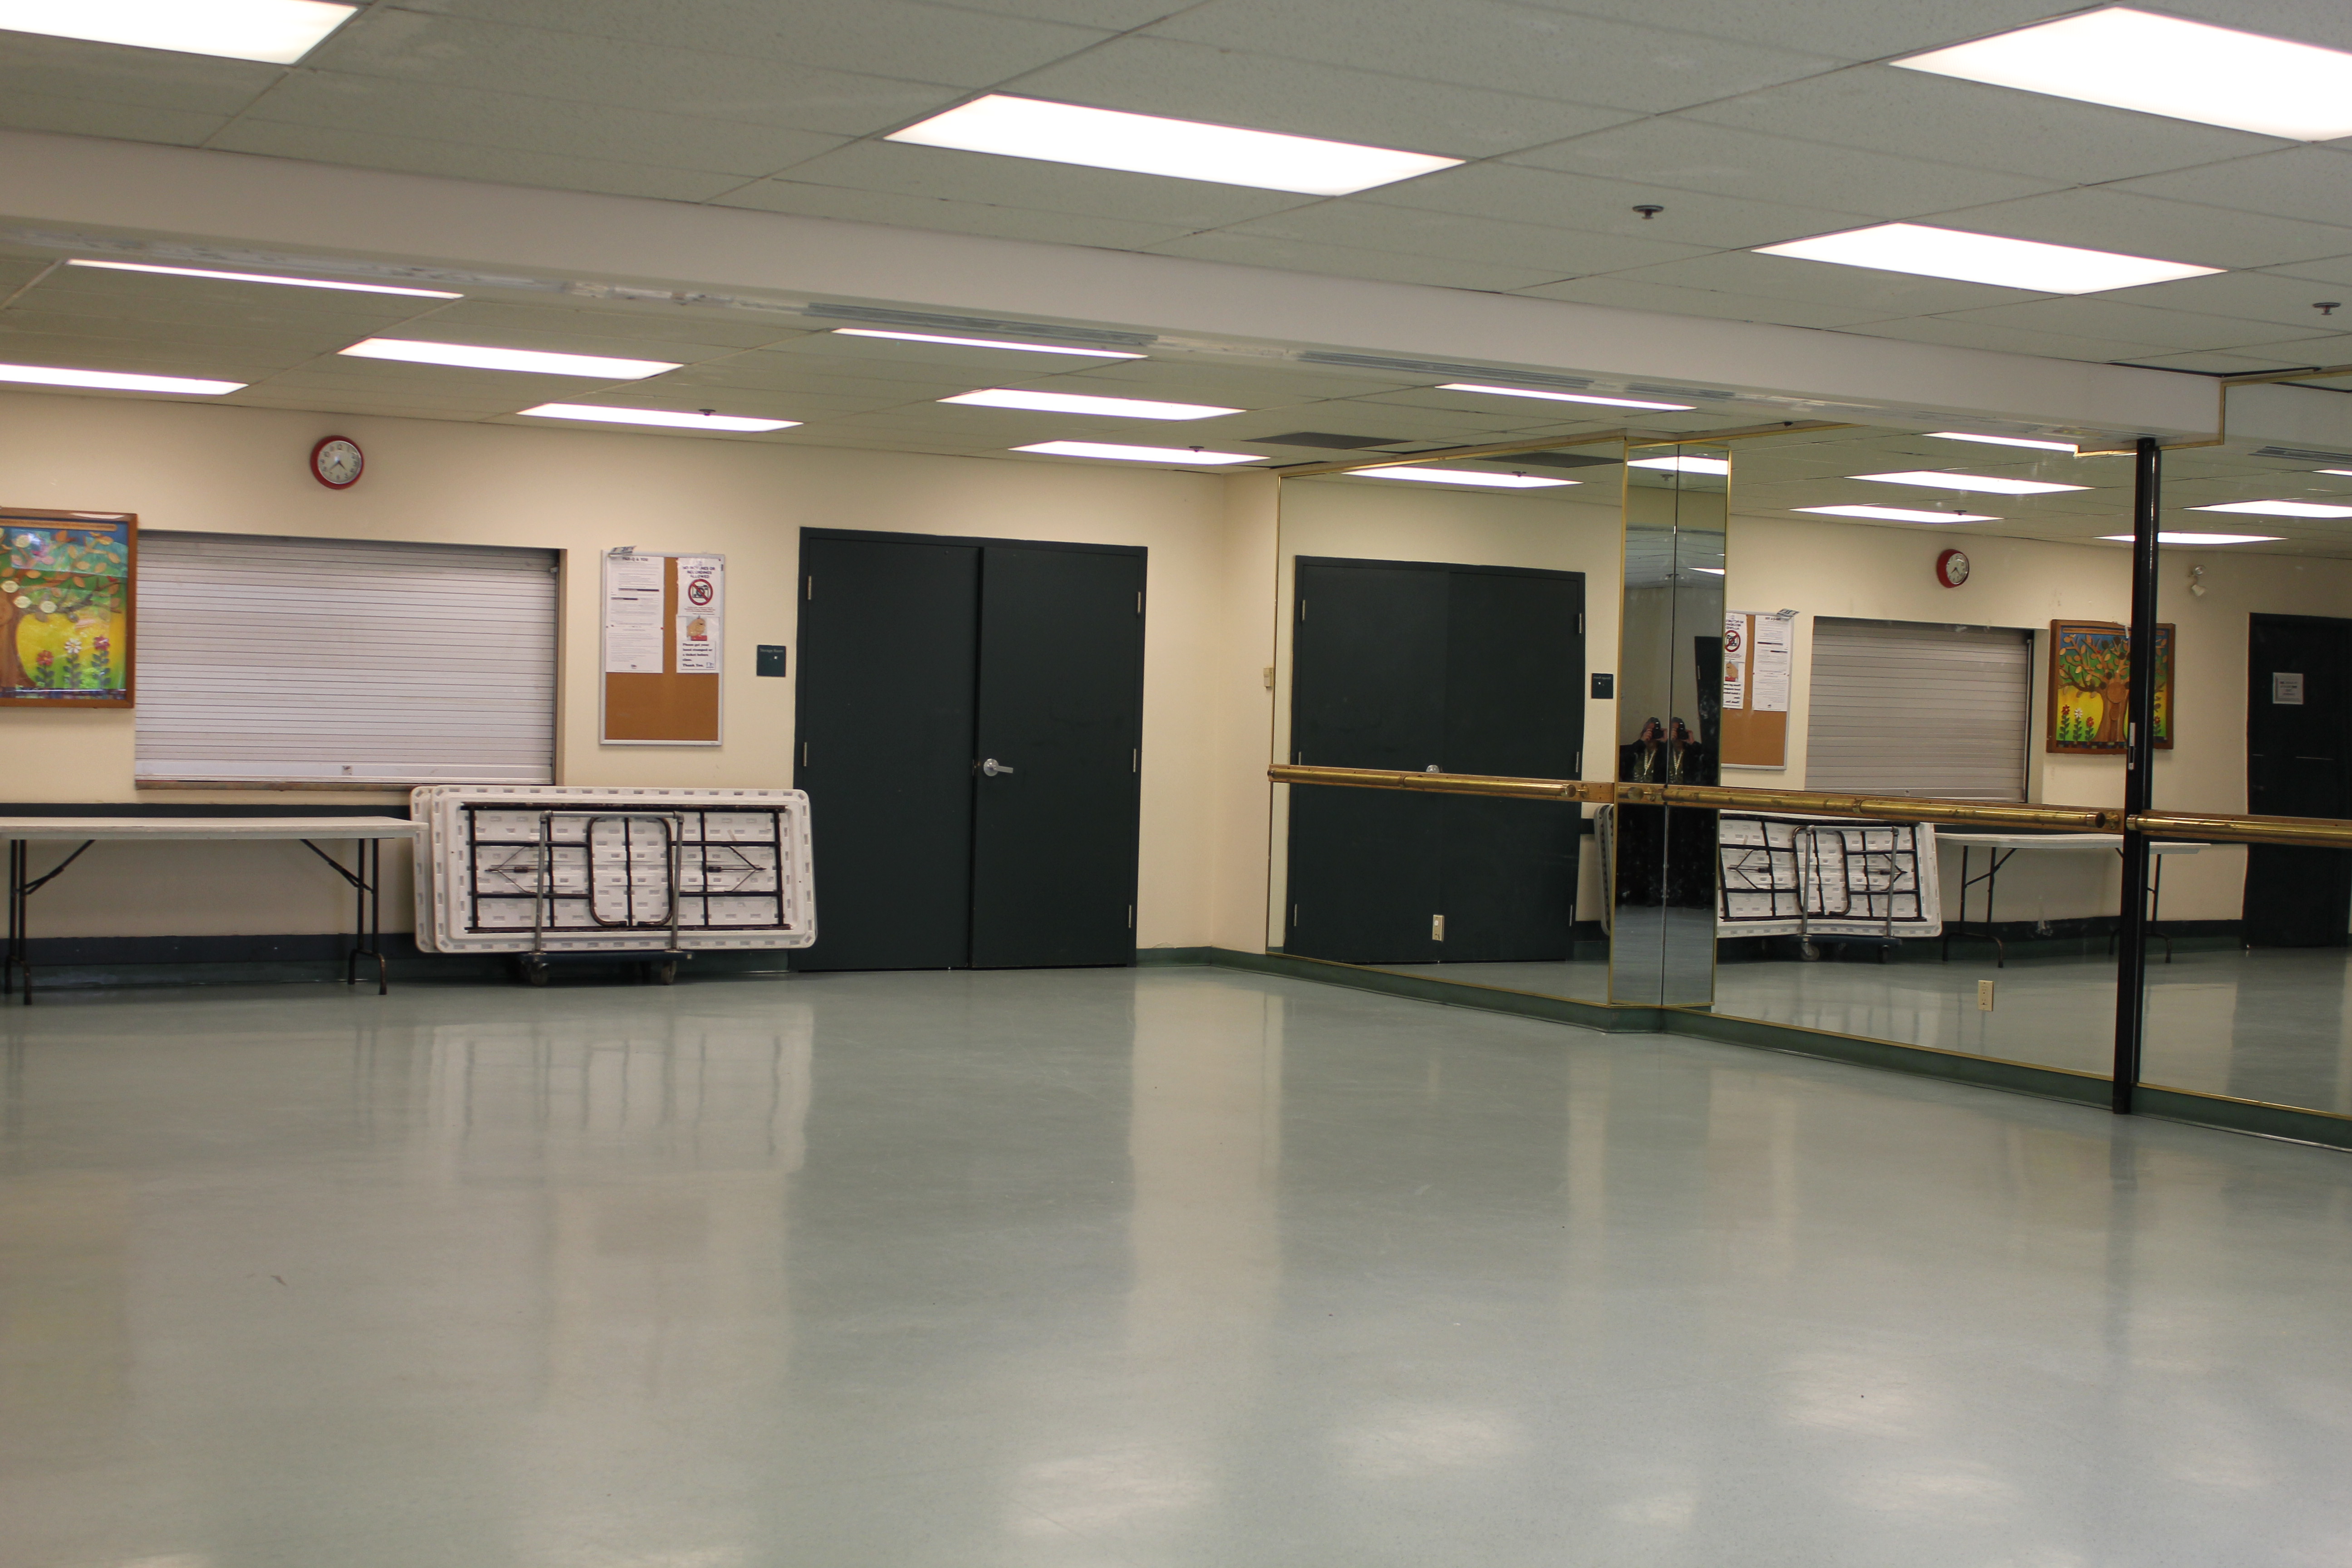 Spacious and empty room with one wall containing mirrors and a door to the storage room.